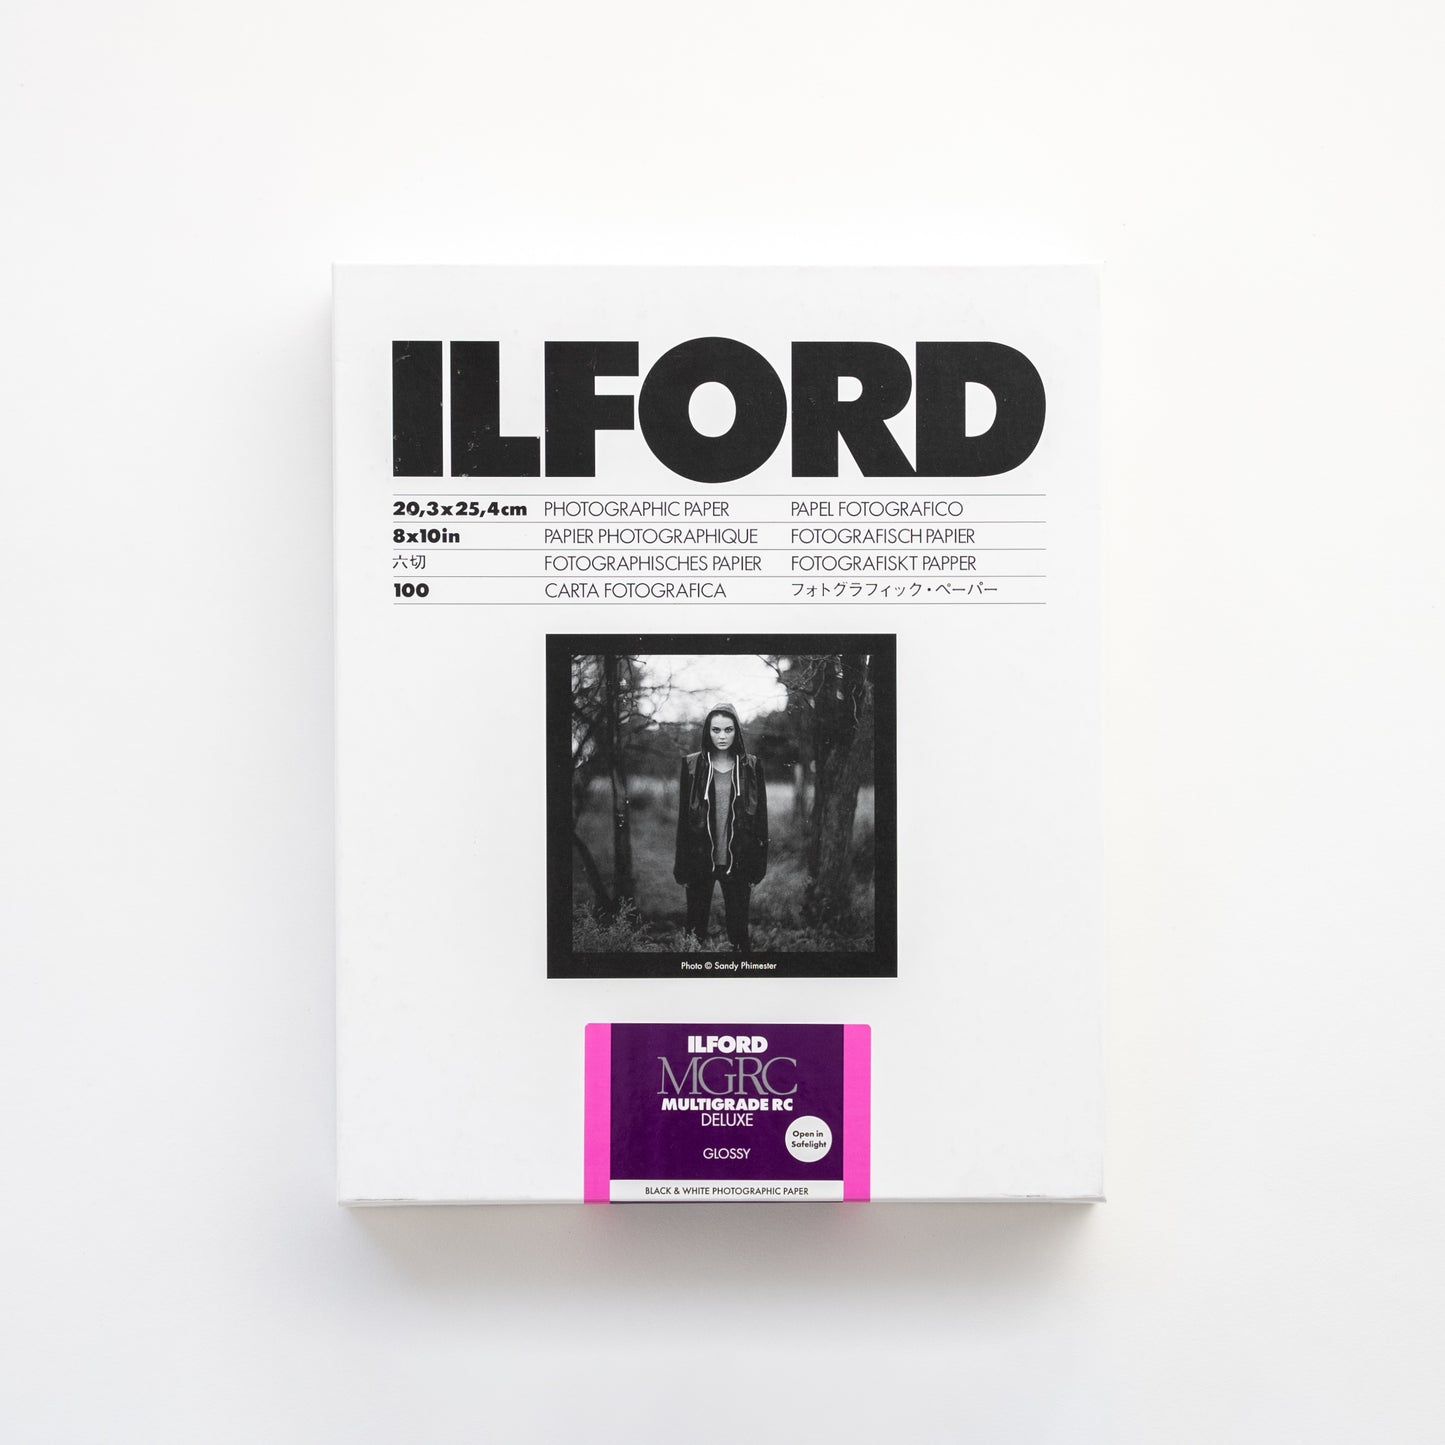 Ilford Multigrade RC Deluxe Paper "GLOSSY" (8x10in - 100 Sheets)